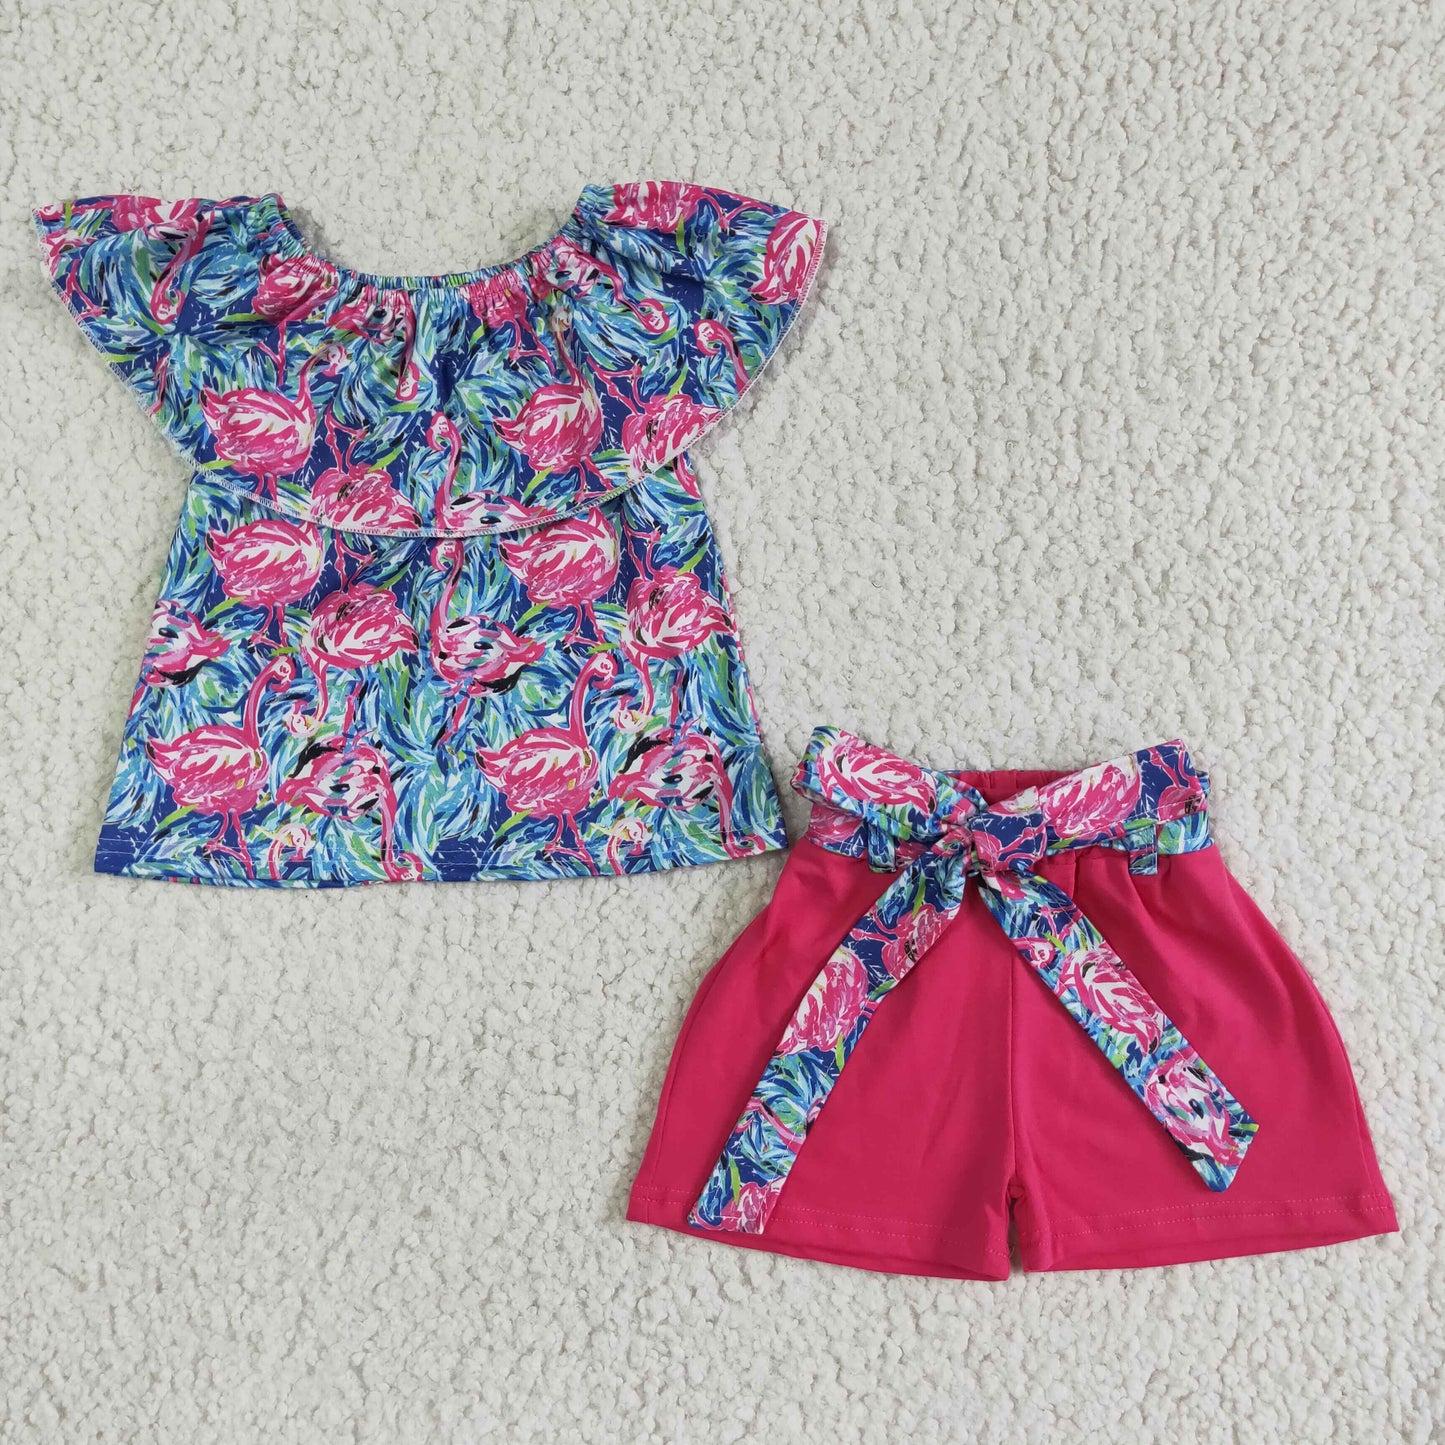 Flamingo shirt solid shorts girls boutique outfits